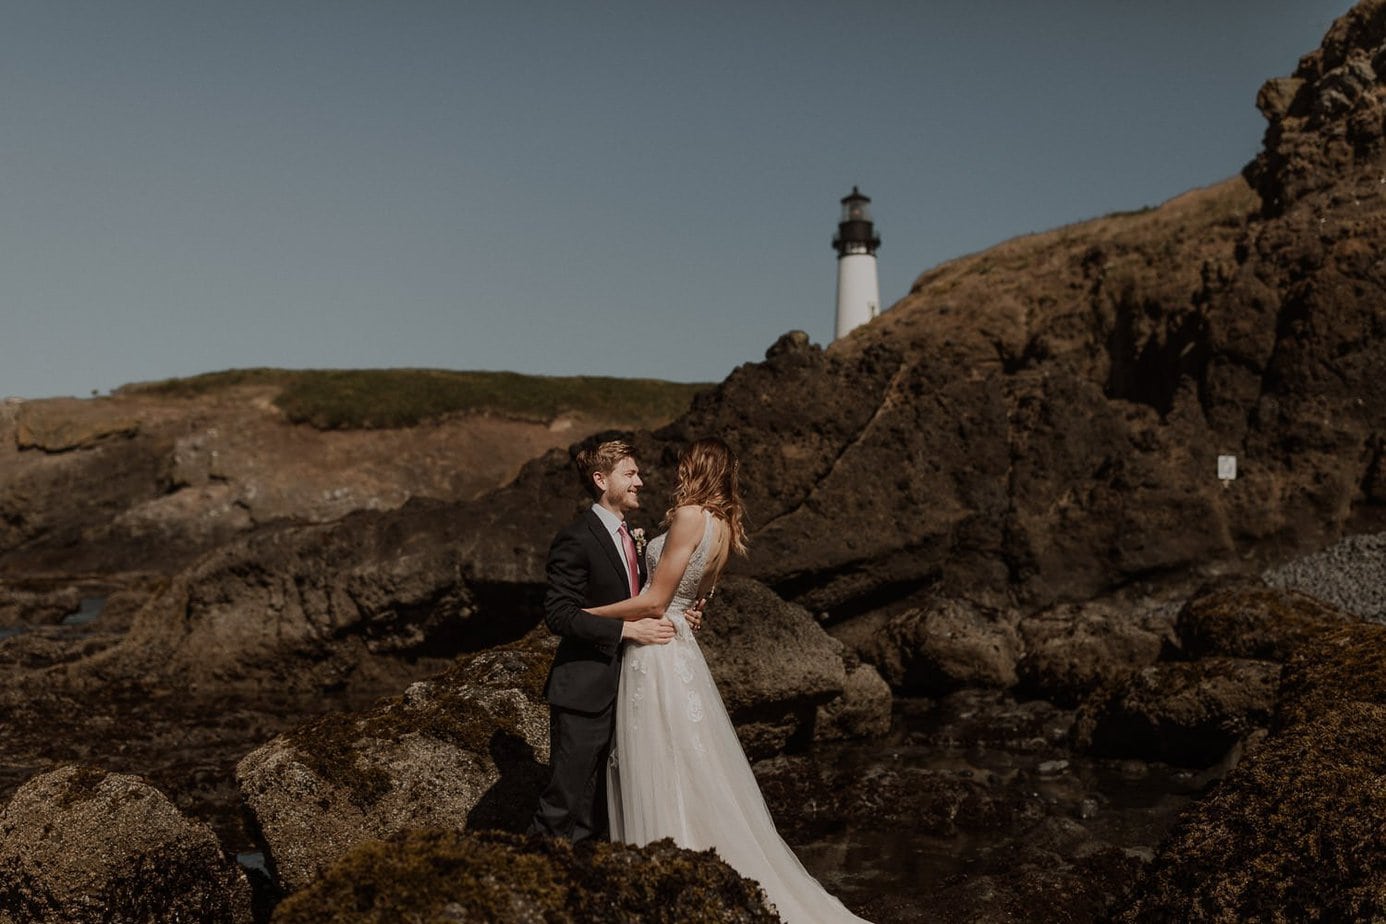 Romantic lighthouse elopement on Cobble Beach. The Oregon coast is full of amazing places to elope. Wedding couple caresses on the black stone beach in front of Yaquina Head Lighthouse